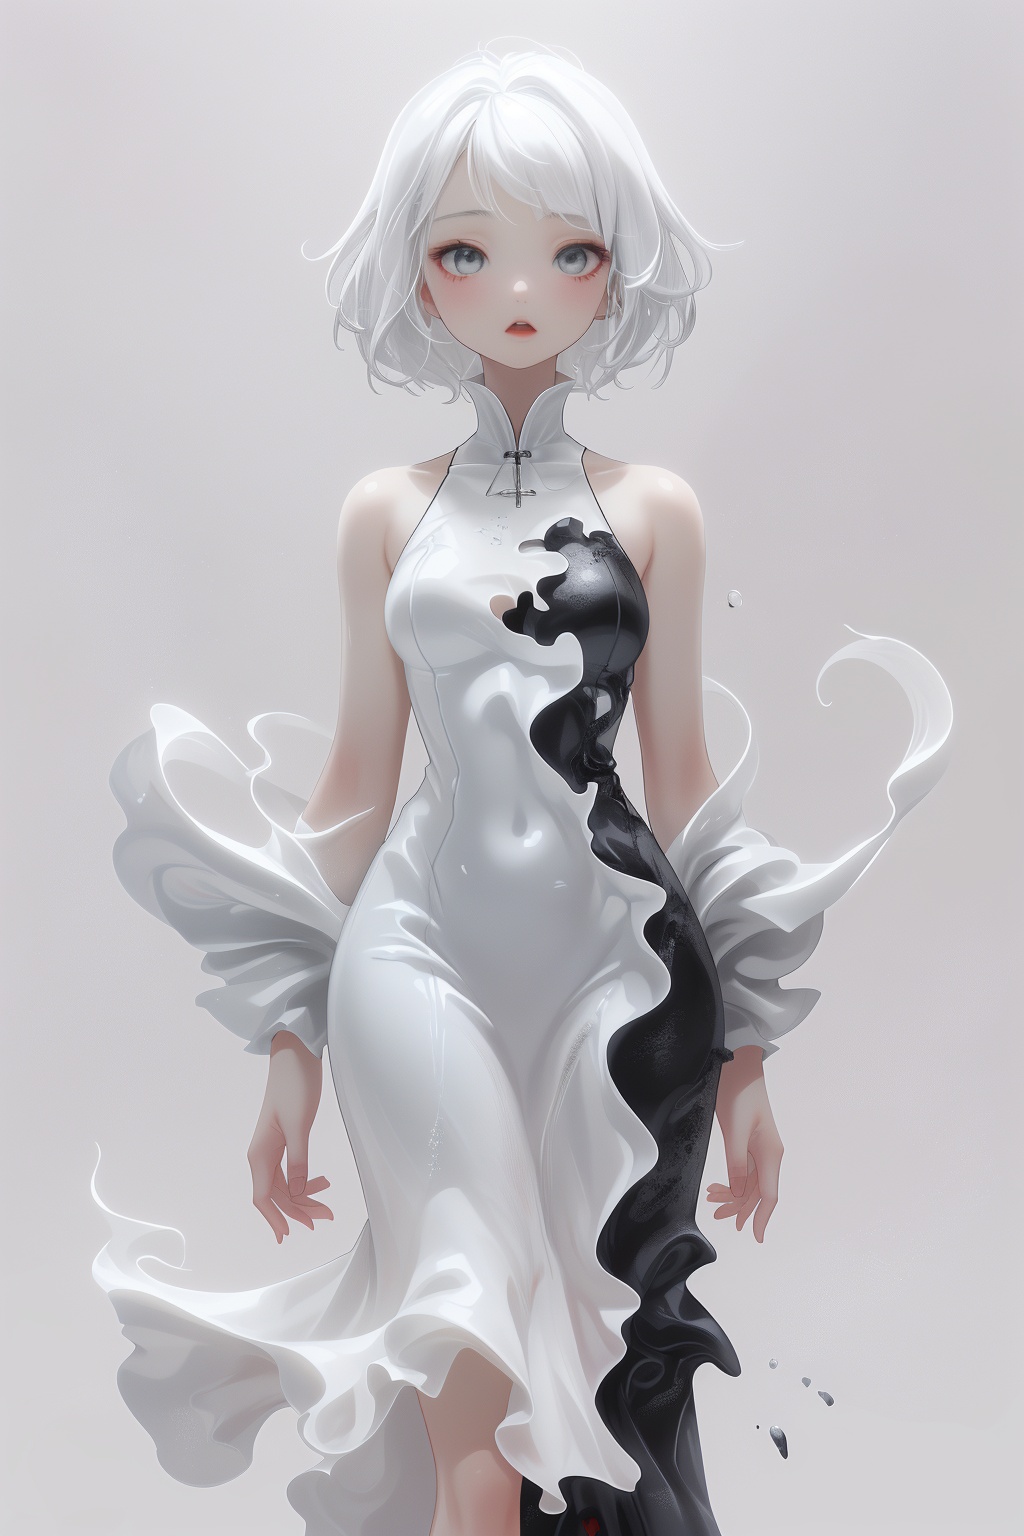 ananqc,a girl with black dress and white hair,